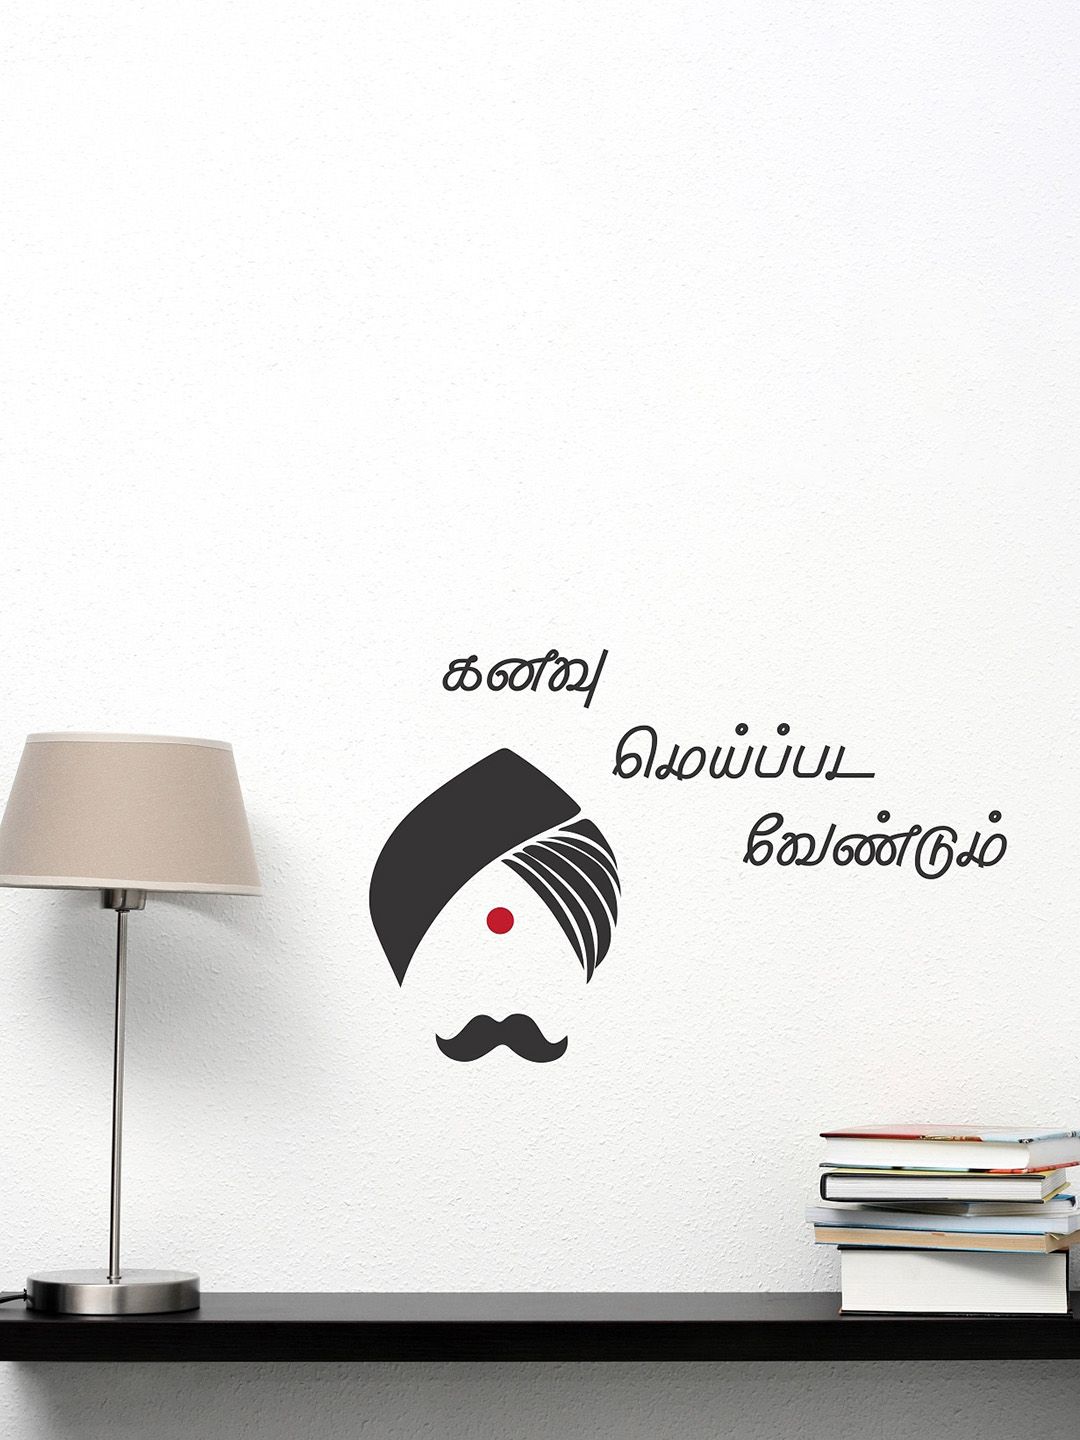 WALLSTICK Black & White Bharathiyar Printed Wall Stickers Price in India